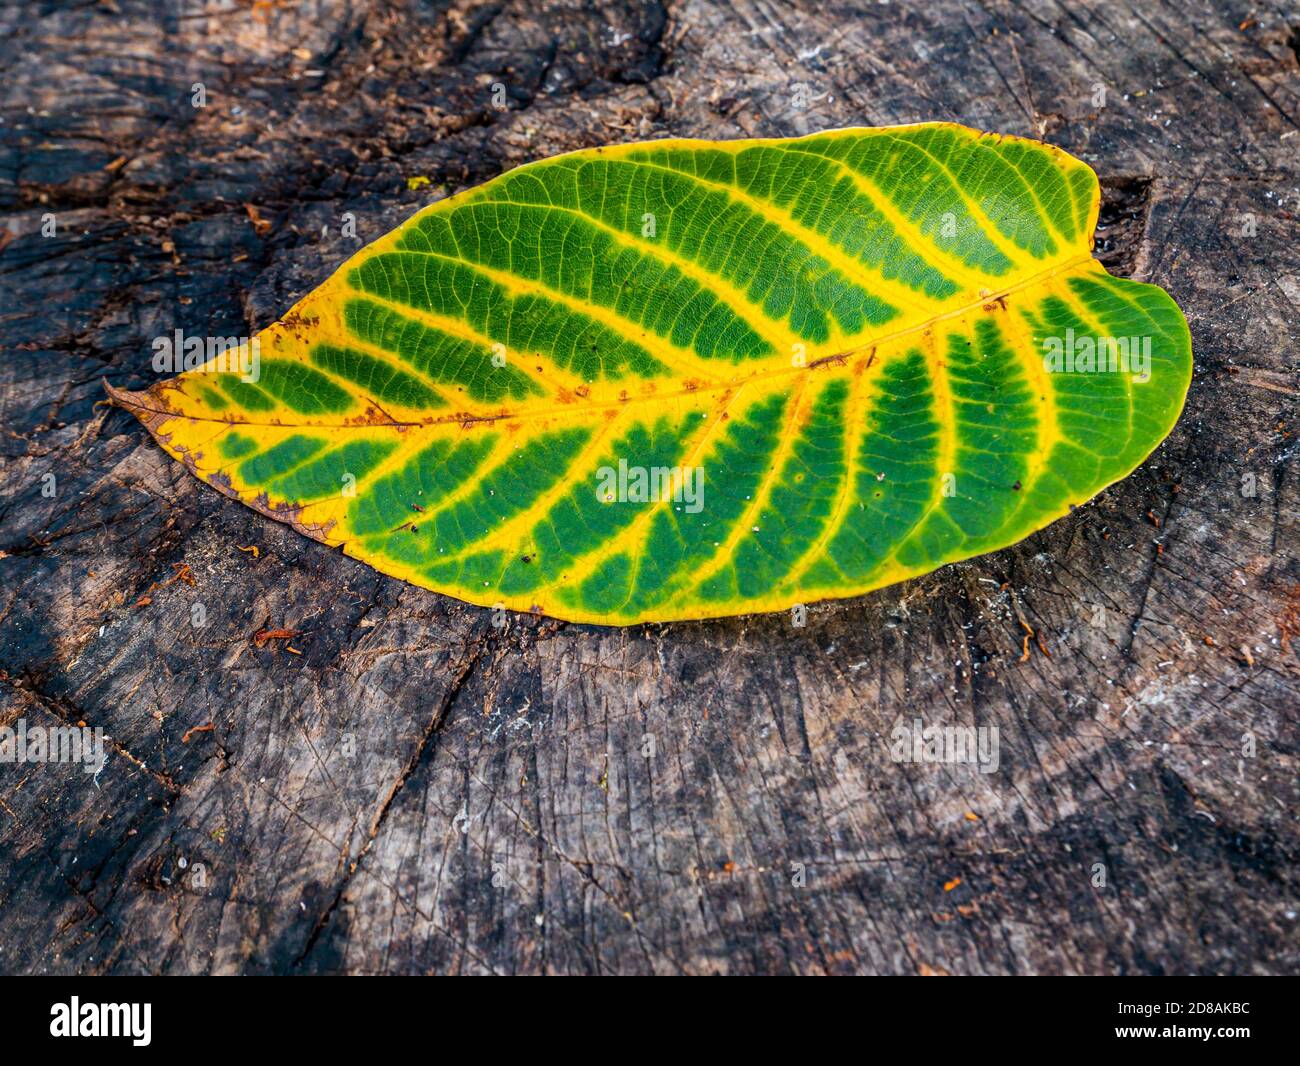 Autumn green leaf of a tree with yellow stripes. Stock Photo